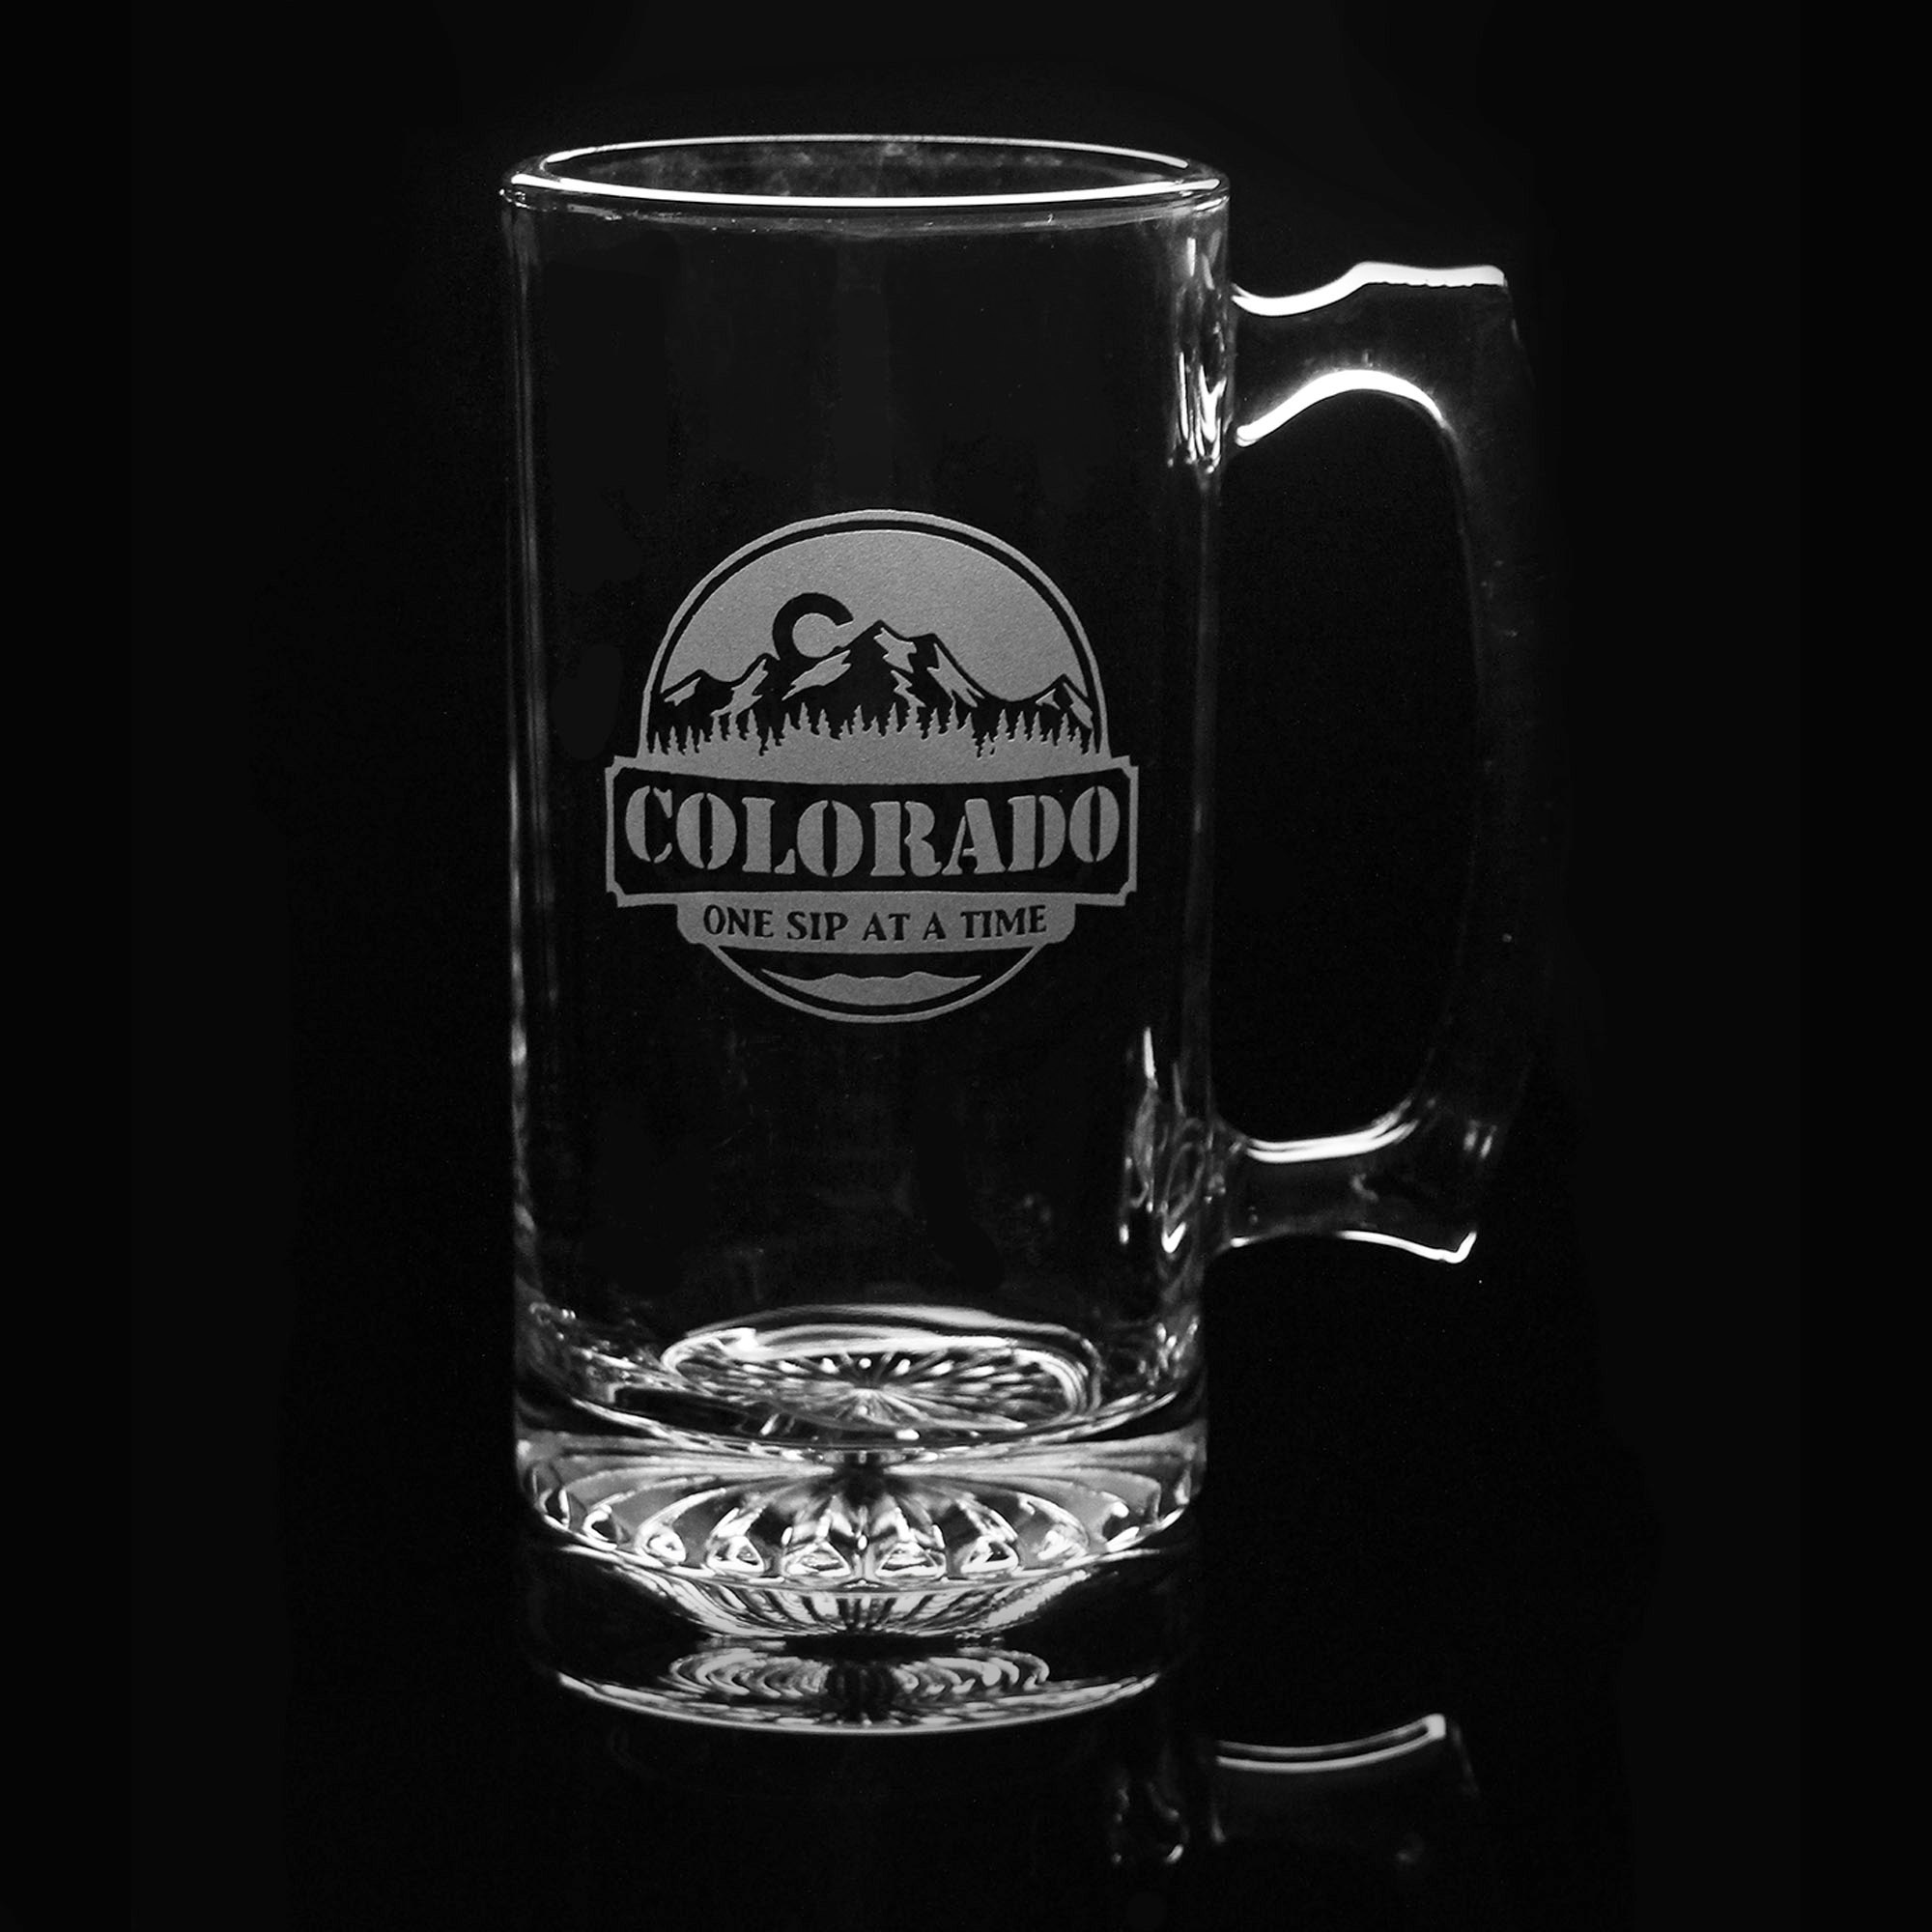 Details about   BEER Glass Mug Stein ~ Brew At The Denver Zoo 2011 ~ Sly & Frosty Arctic Fox Ale 